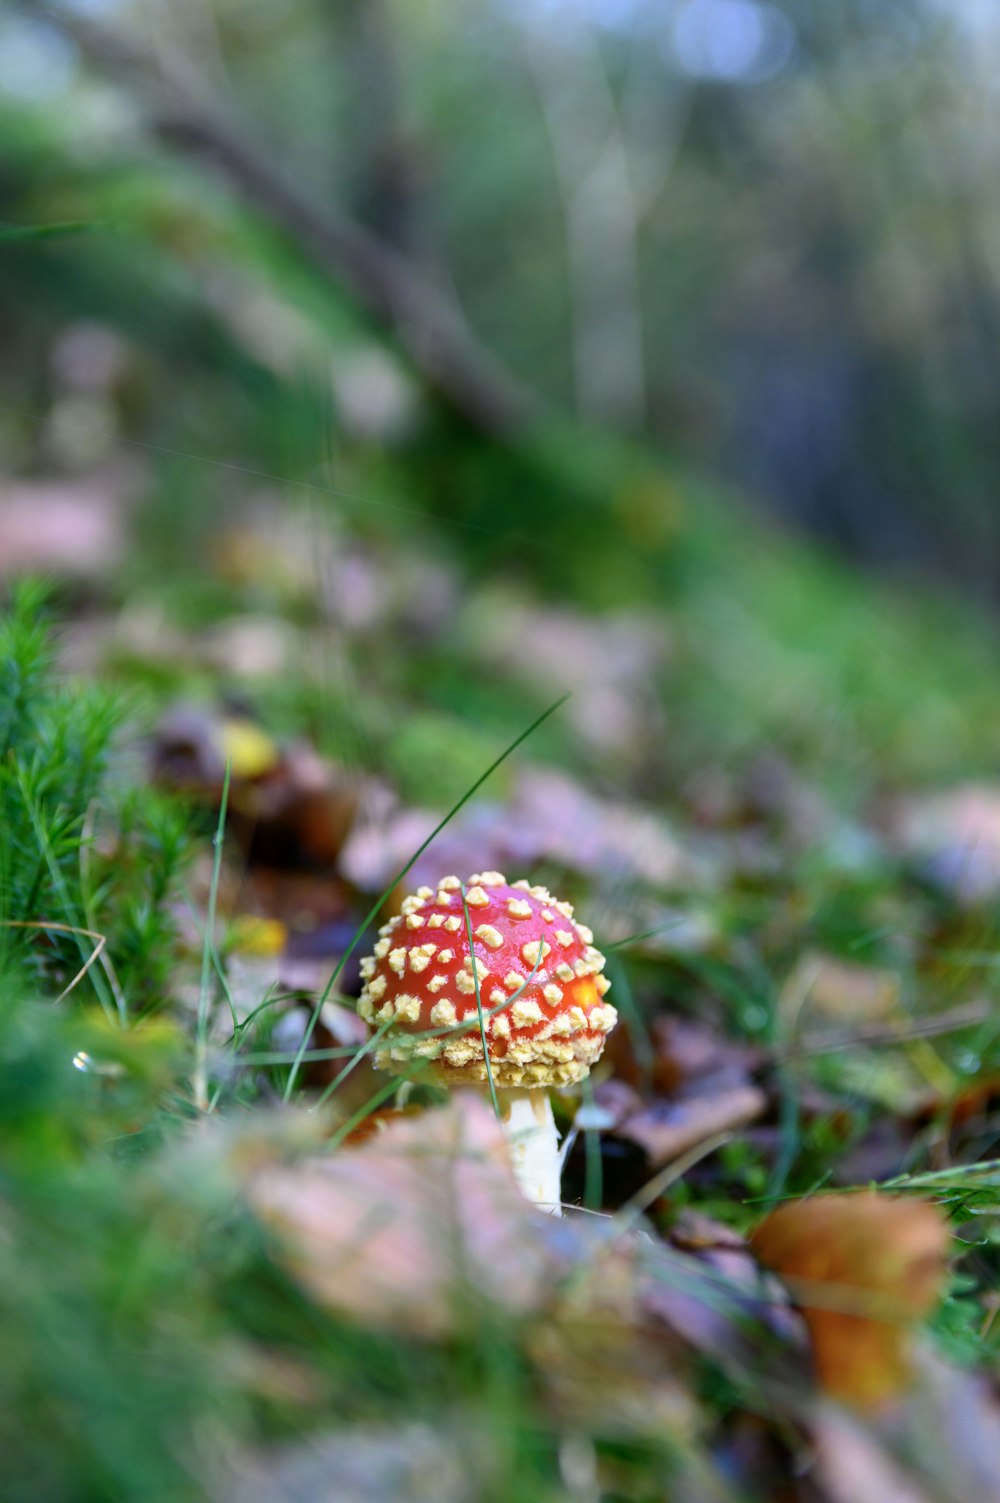 a small red and yellow mushroom in the grass